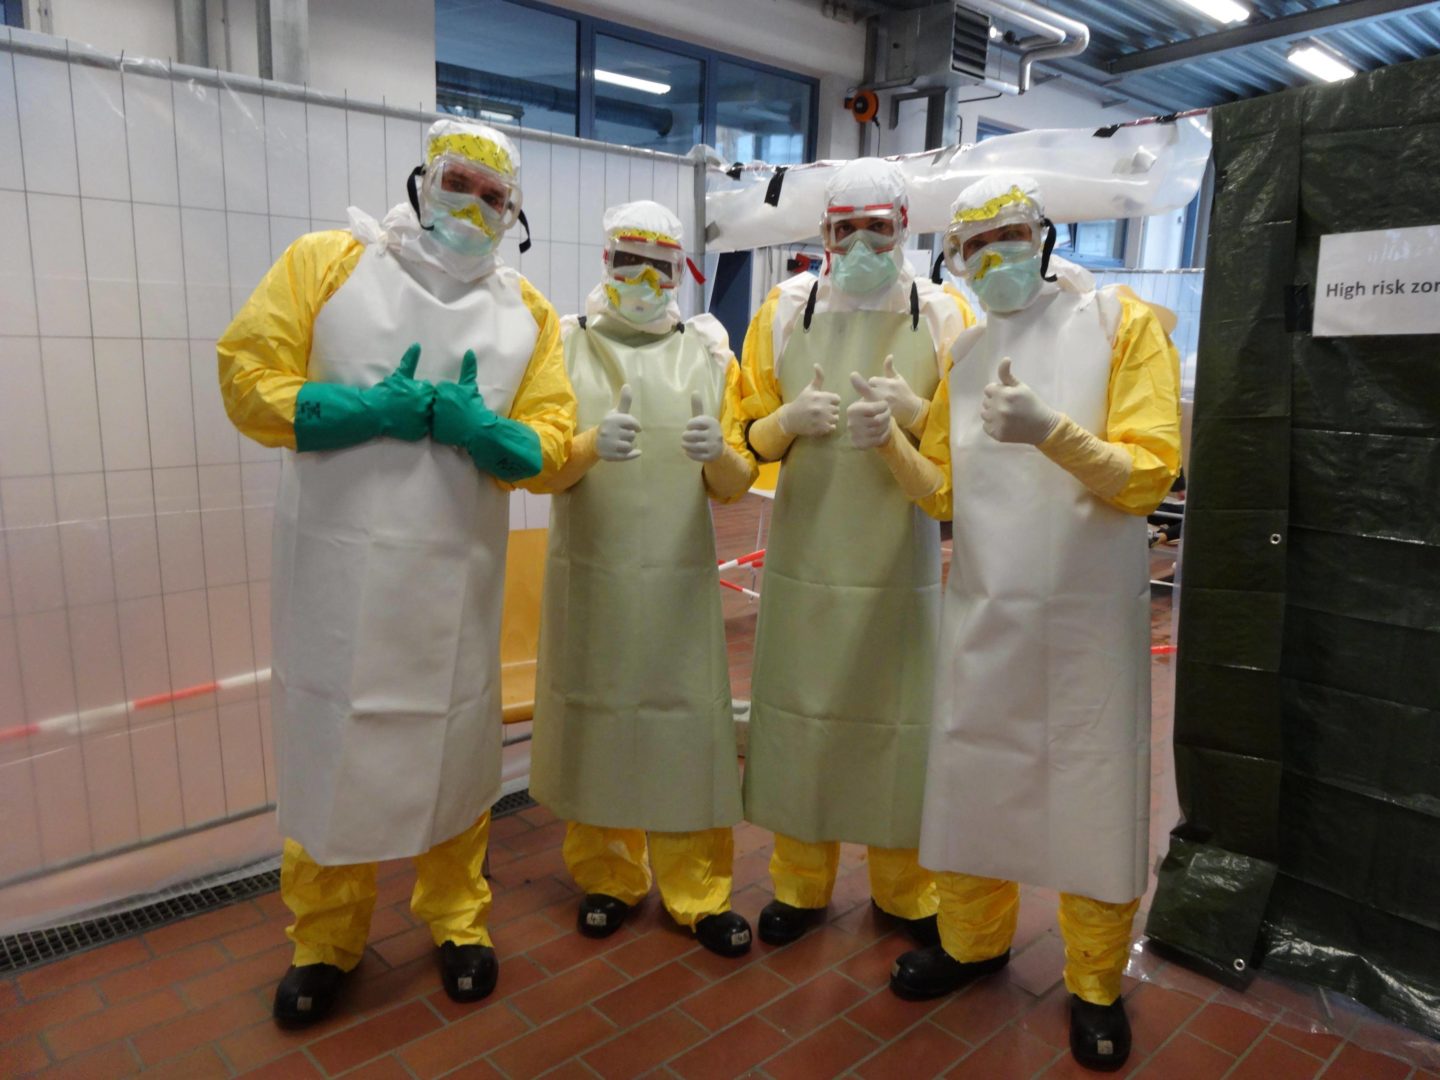 D-Wuerzburg FWS 20141111 Ebola Training Our Team In PPE Ready To Enter High Risk Zone 1